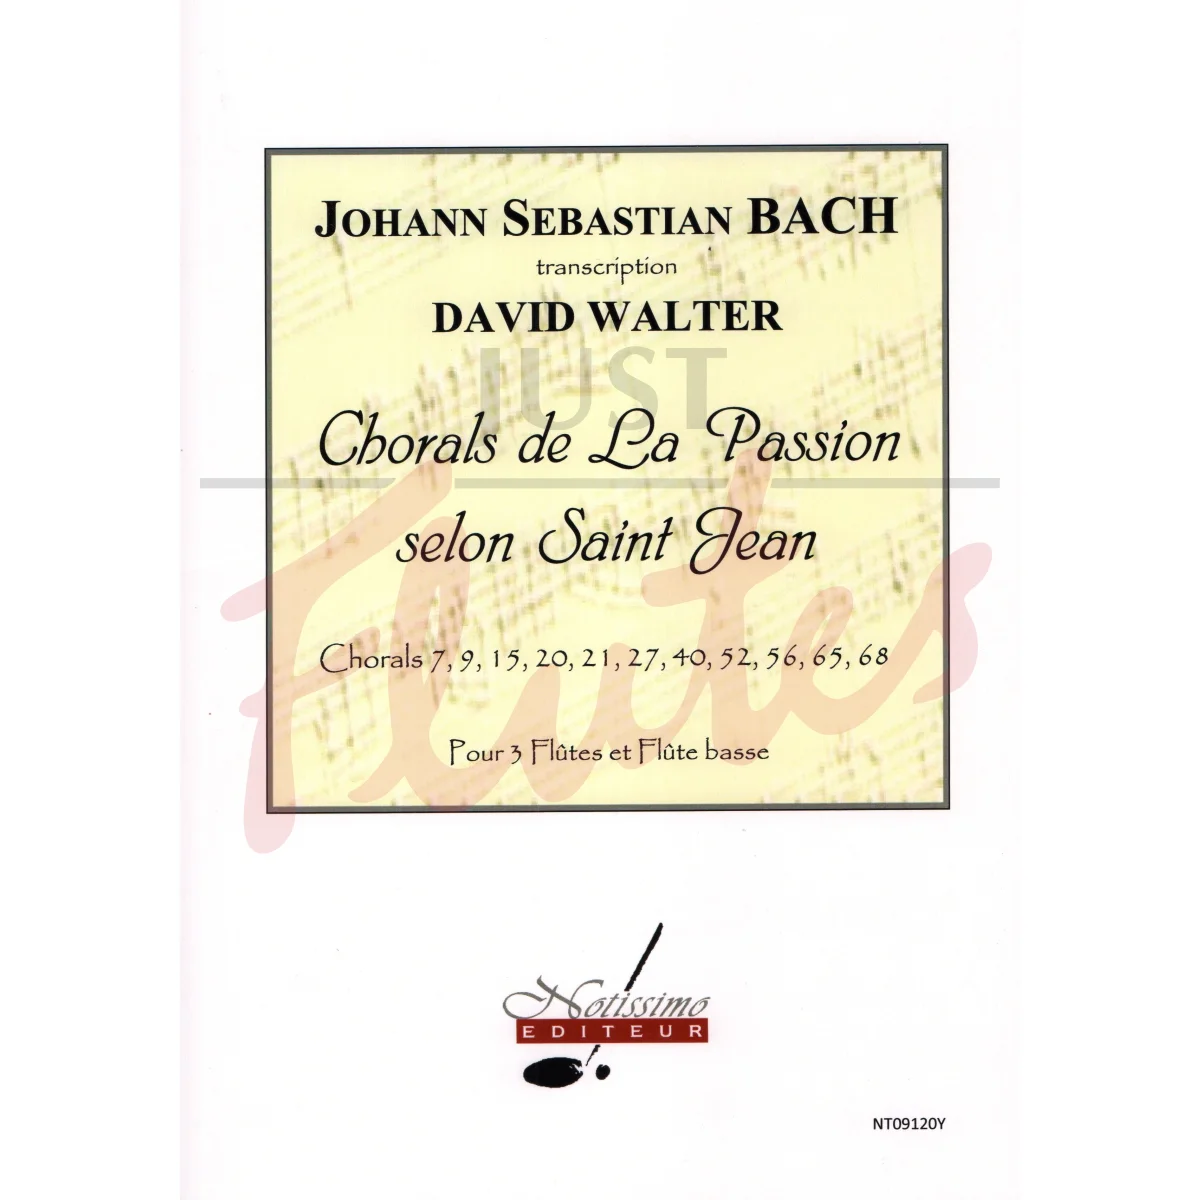 Chorales from St John Passion for Three Flutes and Bass Flute